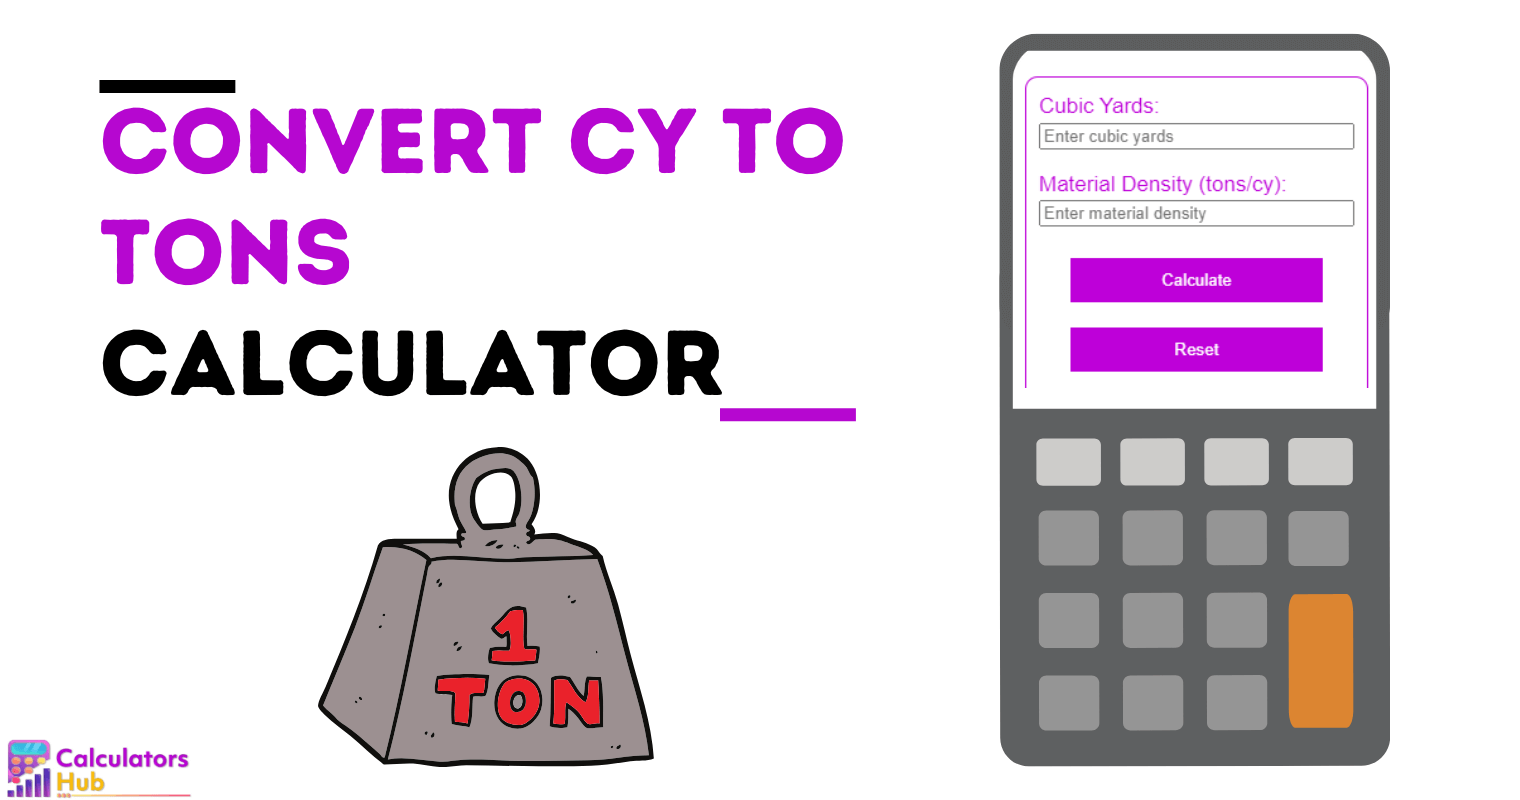 Convert cy to Tons Calculator